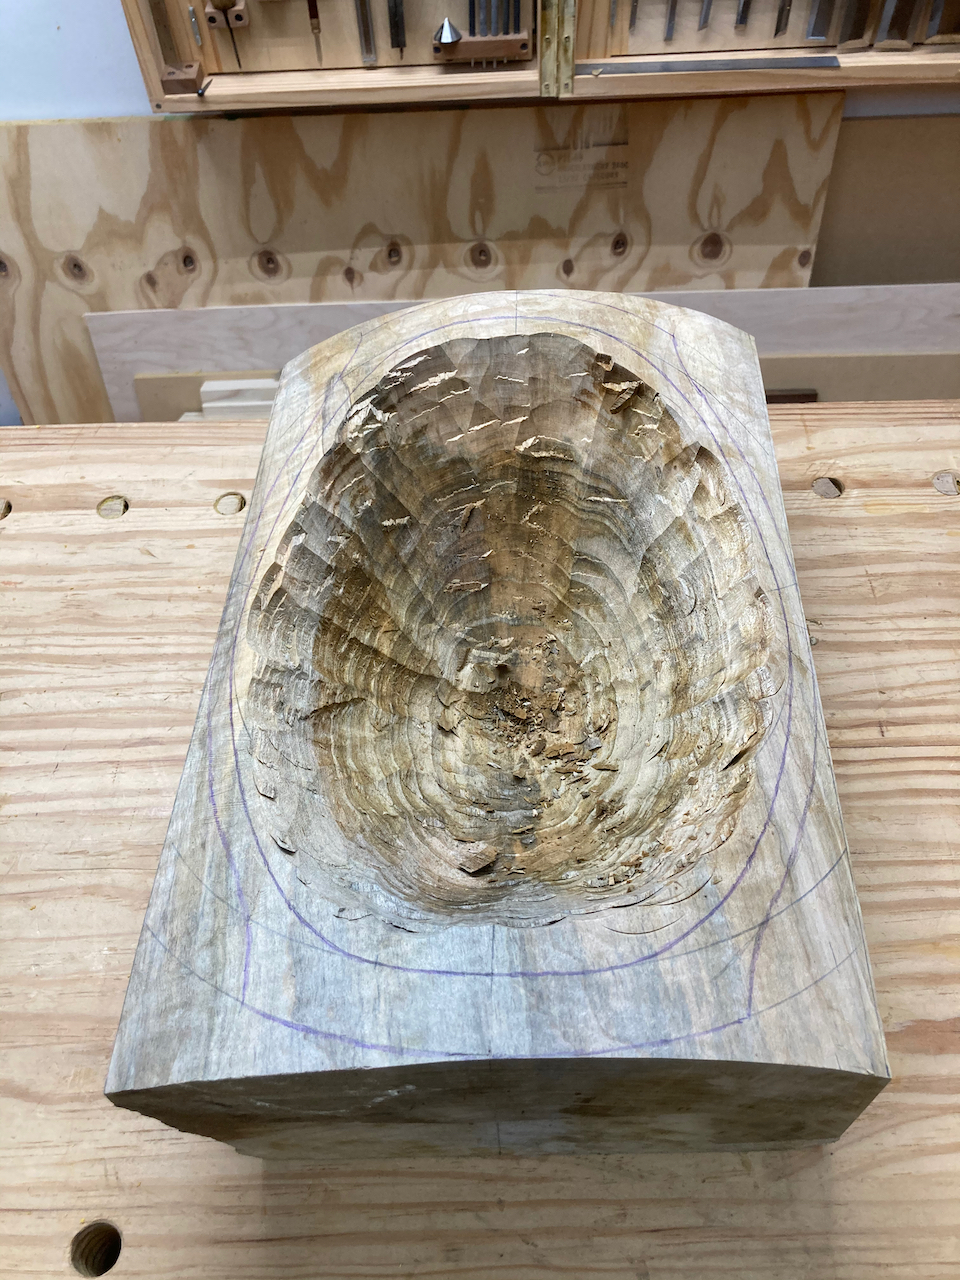 Rough bowl cavity which still needs considerable work